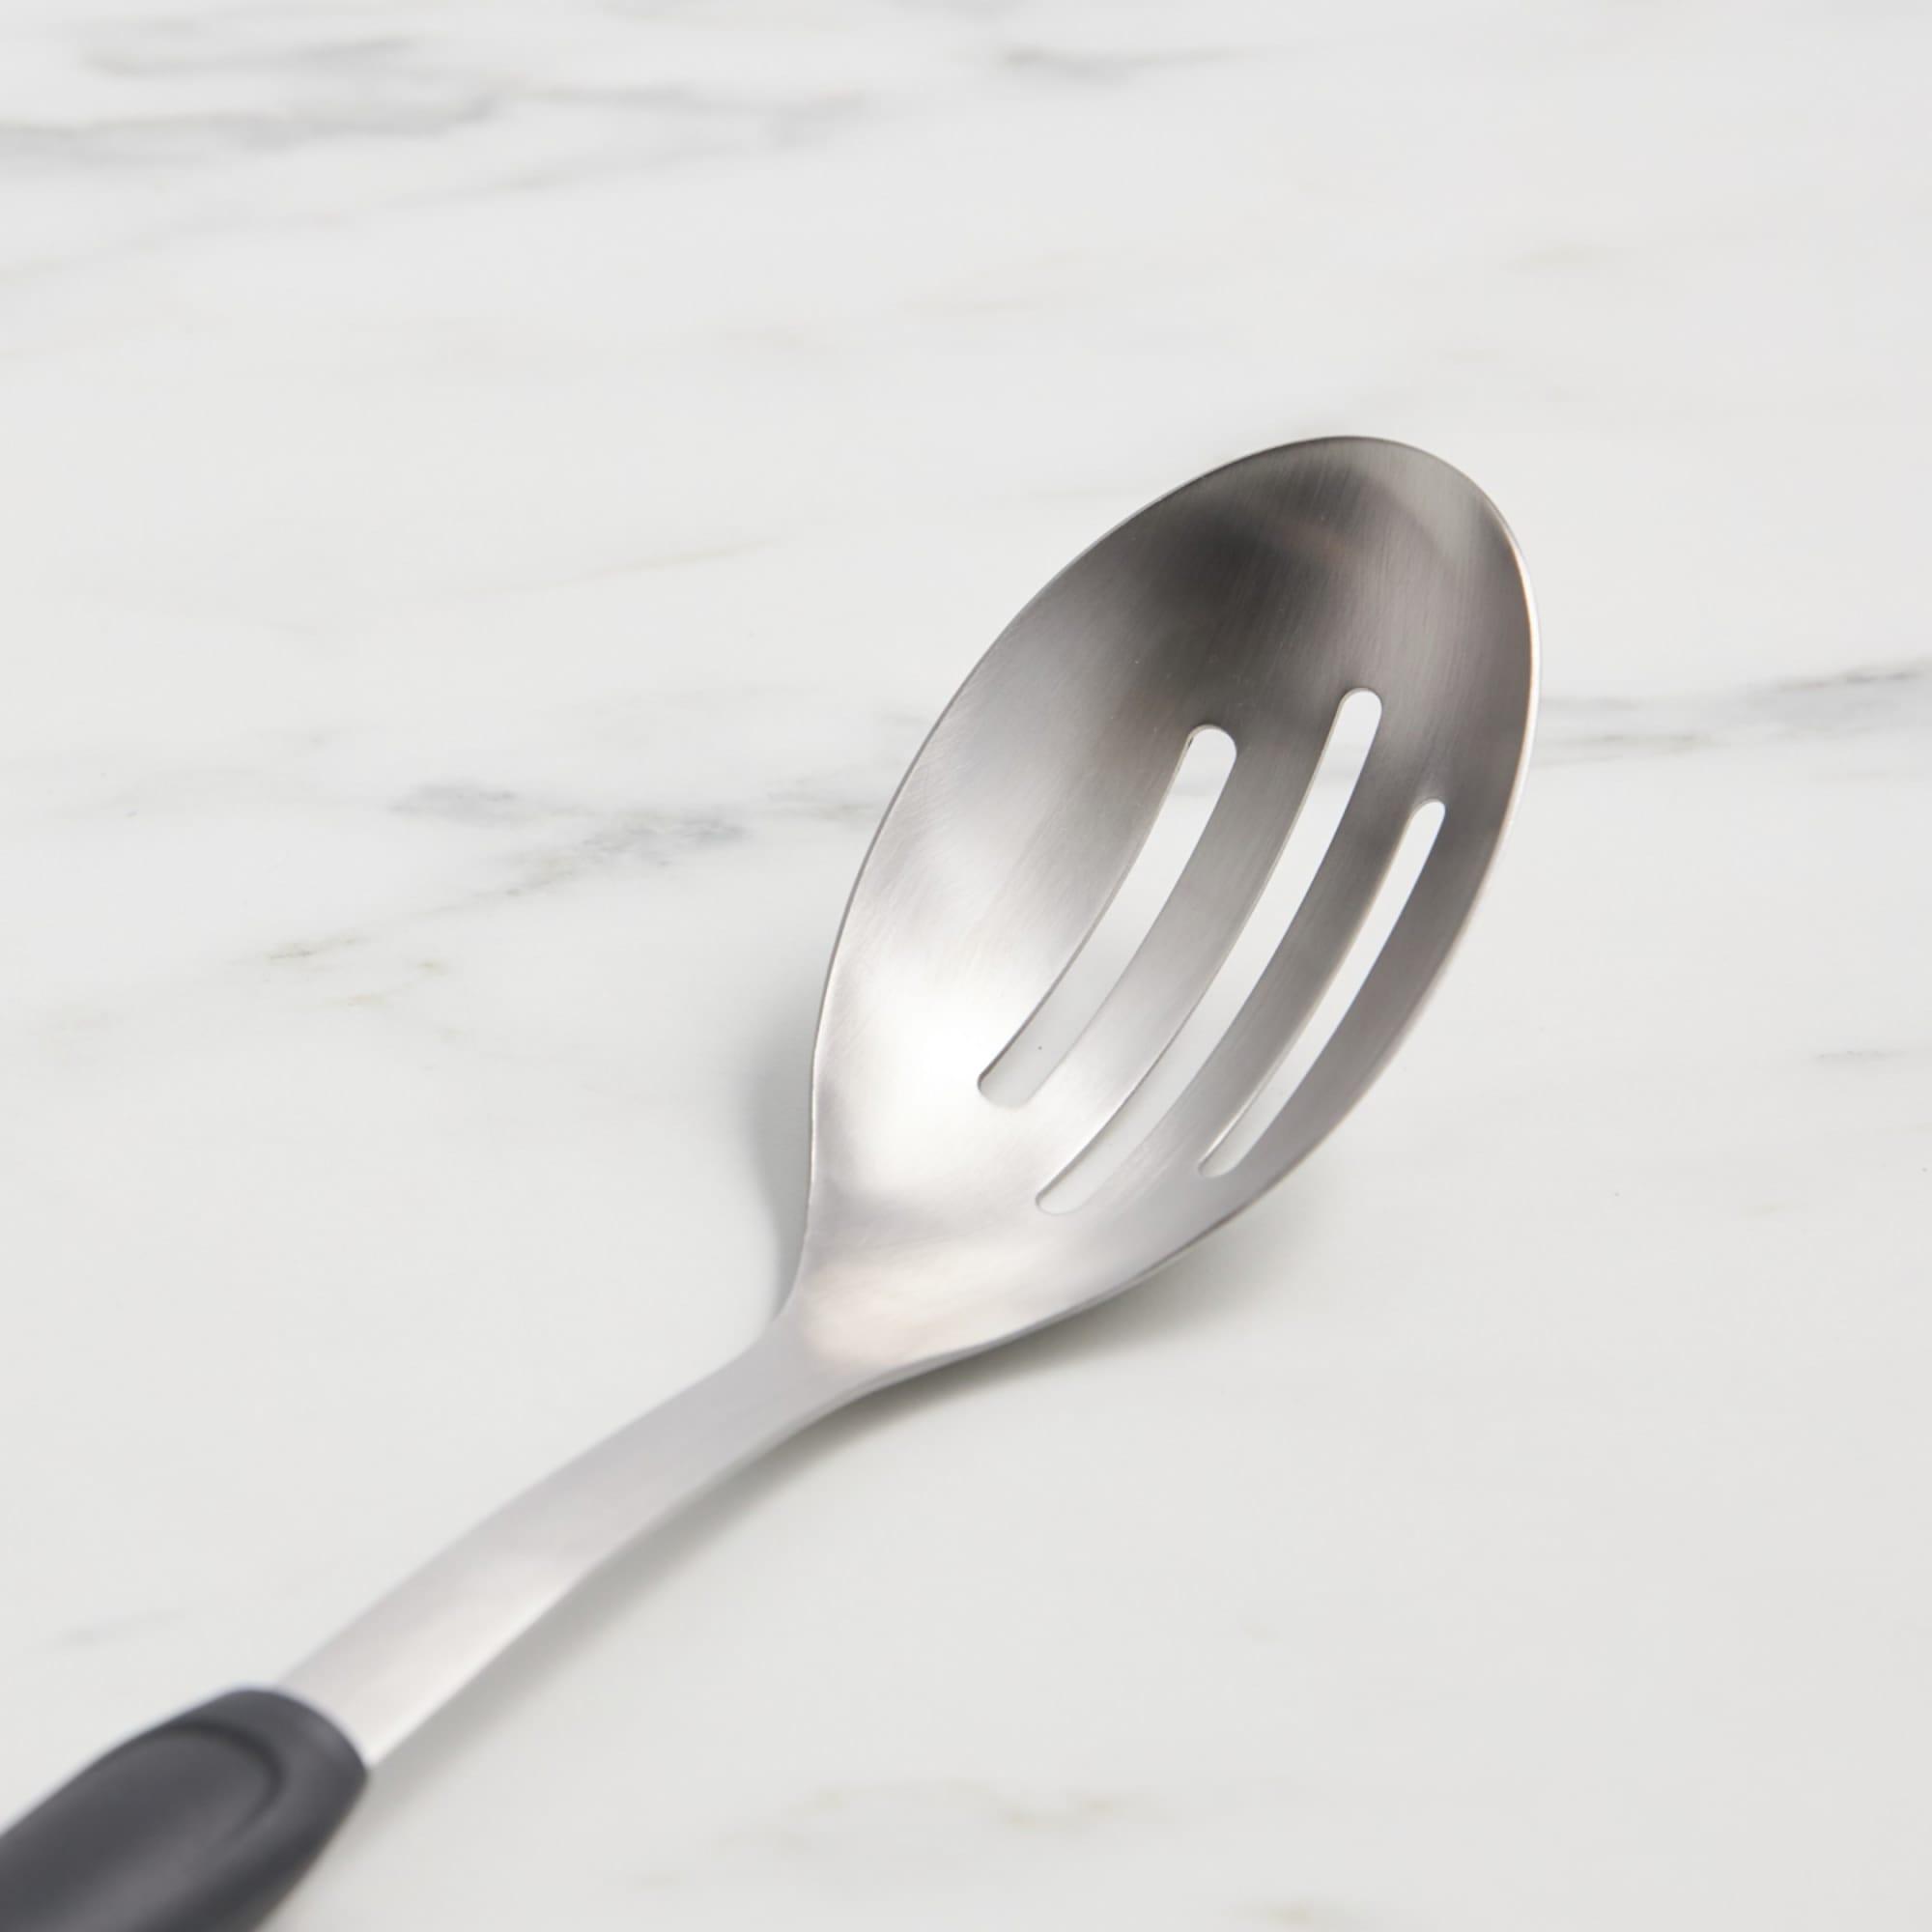 Kitchen Pro Ergo Stainless Steel Slotted Spoon Image 3